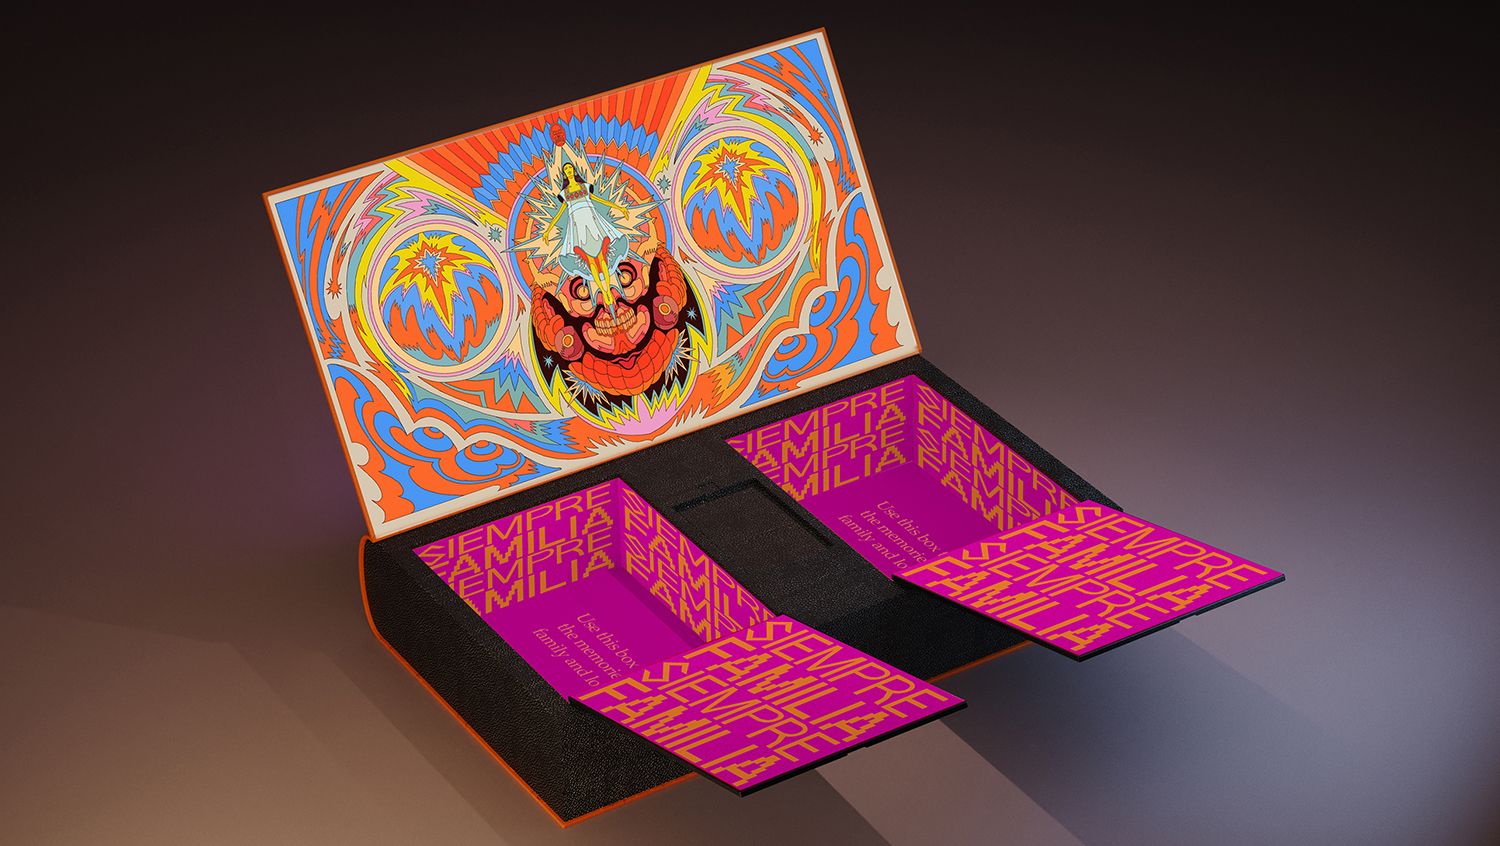 Box for Dias de Morte Jordans featuring colorful illustration from video and mythology